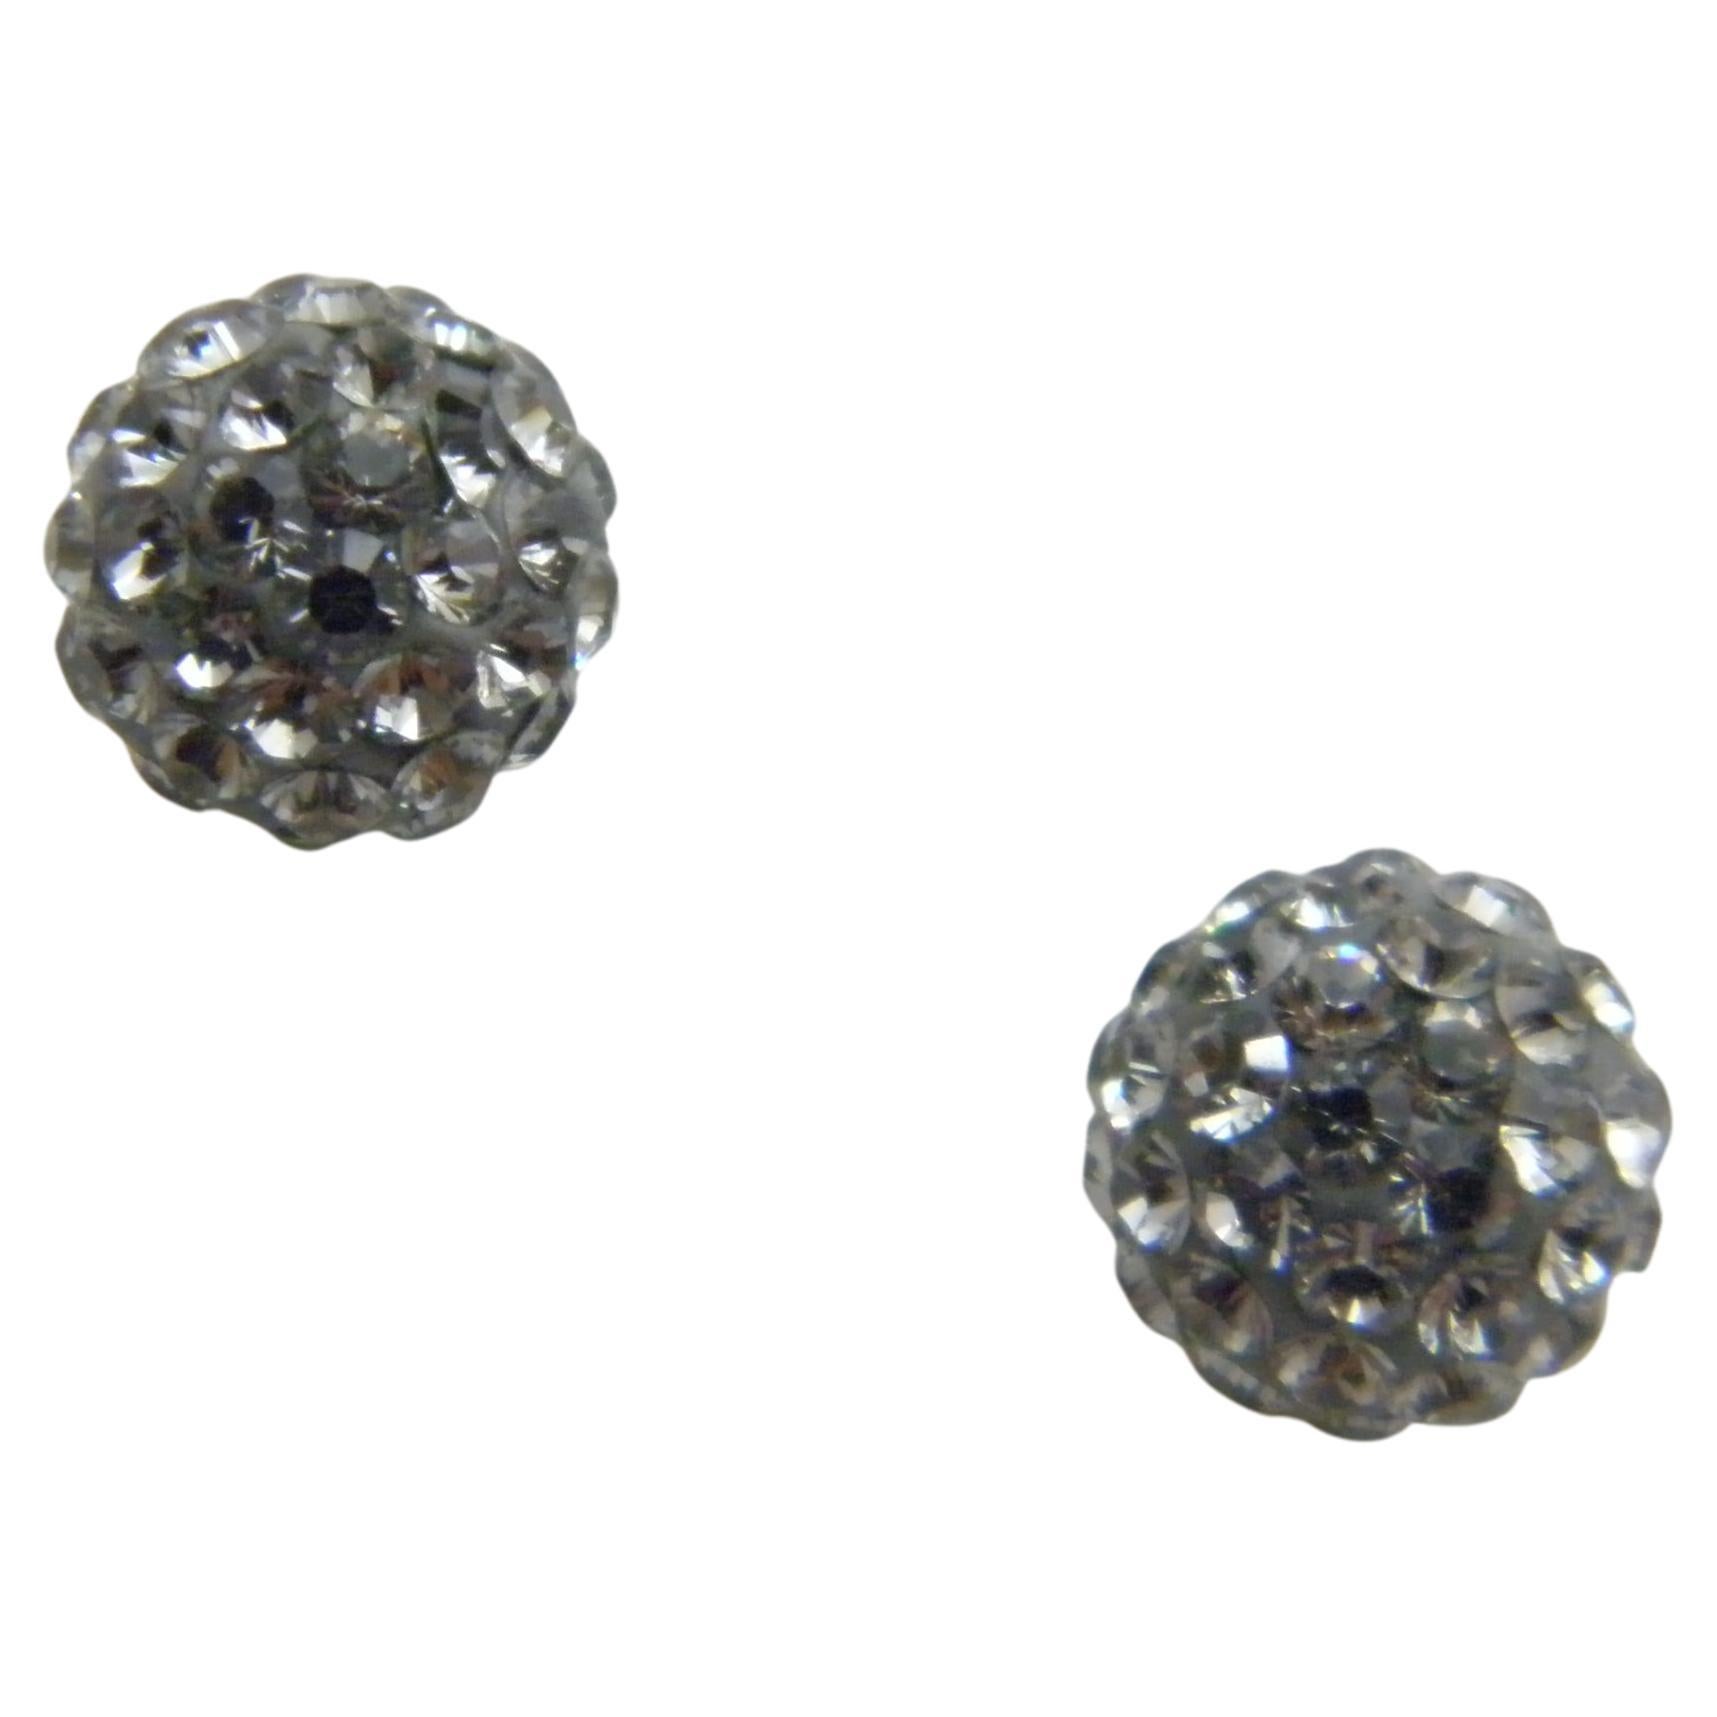 Vintage 9ct Gold Large Glitter Ball Crystal Stud Earrings 375 Purity VGC For Sale